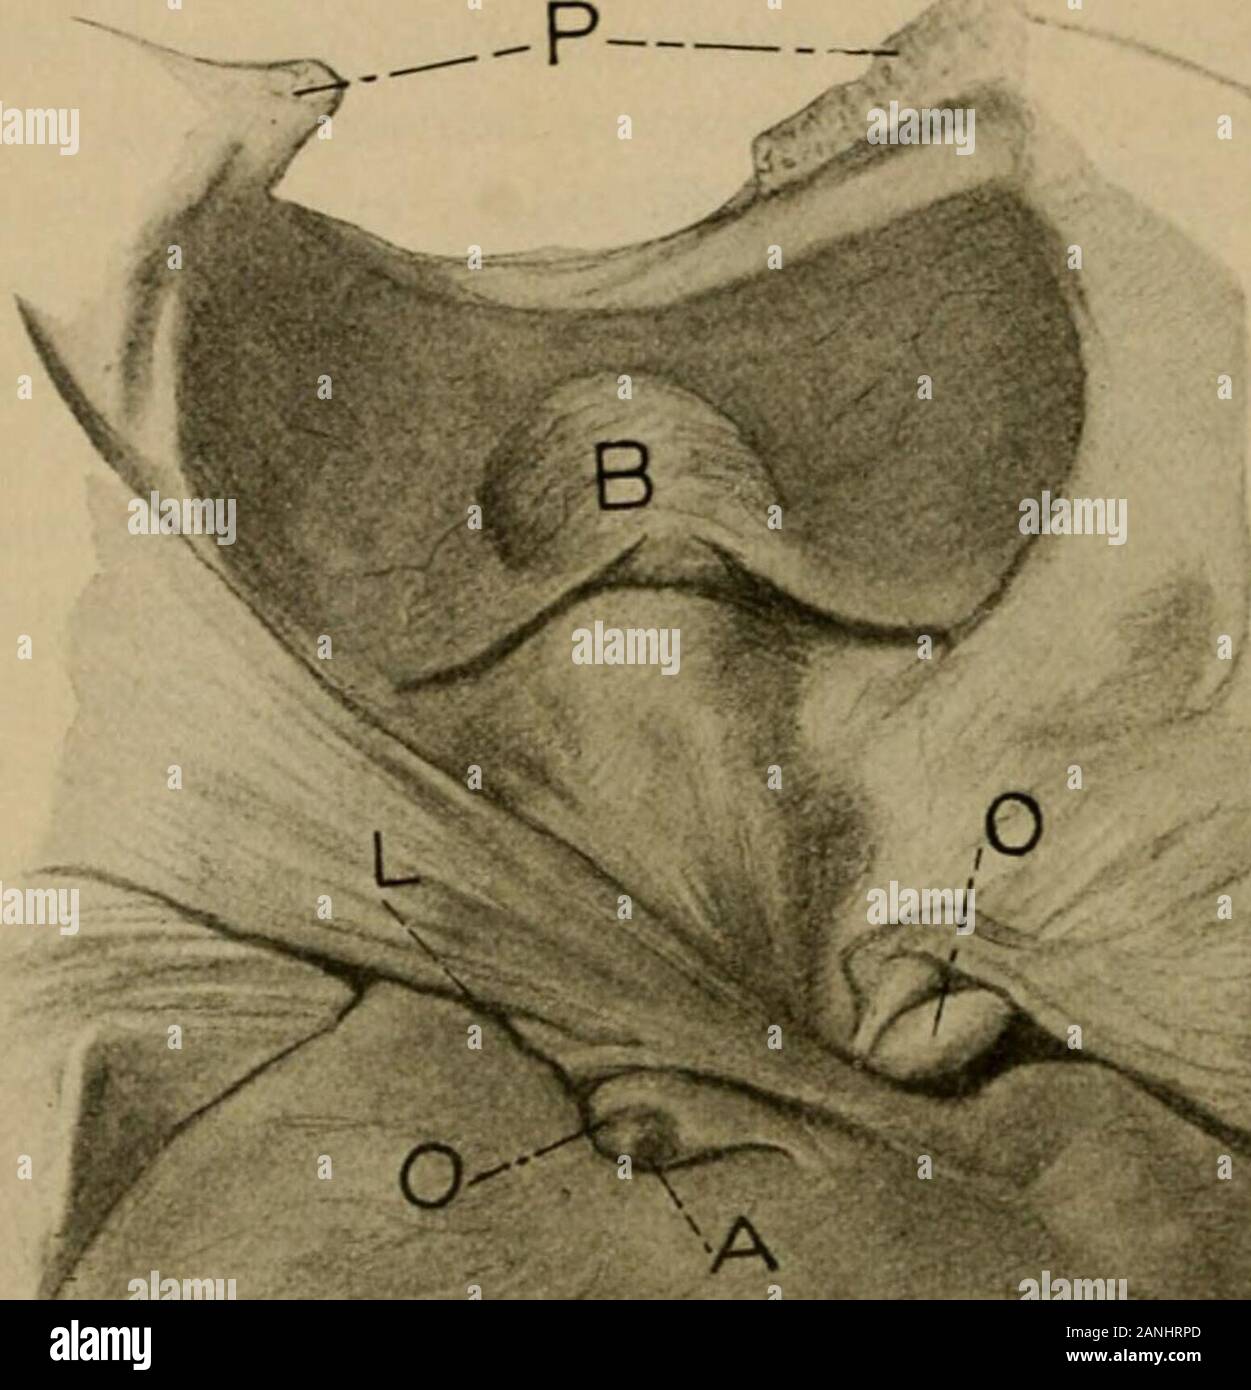 Veterinary obstetrics, including the diseases of breeding animals and of the new-born . Fig. 114. The Mechanism of Torsion of the Uterus in the Cow.Gravid Uterus in Normal Position at about the 7Thmonth of Pregnancy, Seen from Below. P, Pubis. B, Bladder. L, Broad ligament.L, Point of attachment of broad ligament to abdominal wall.O, O, Ovaries. C, Right cornu. Q., Left (non-gravid) cornu.A, Corpus luteum. 696 Veterinary Obstetrics The causes of torsion have not been fully determined. Any-thing which may violently disturb the uterus may cause it toturn upon its long axis. We have noted the pec Stock Photo